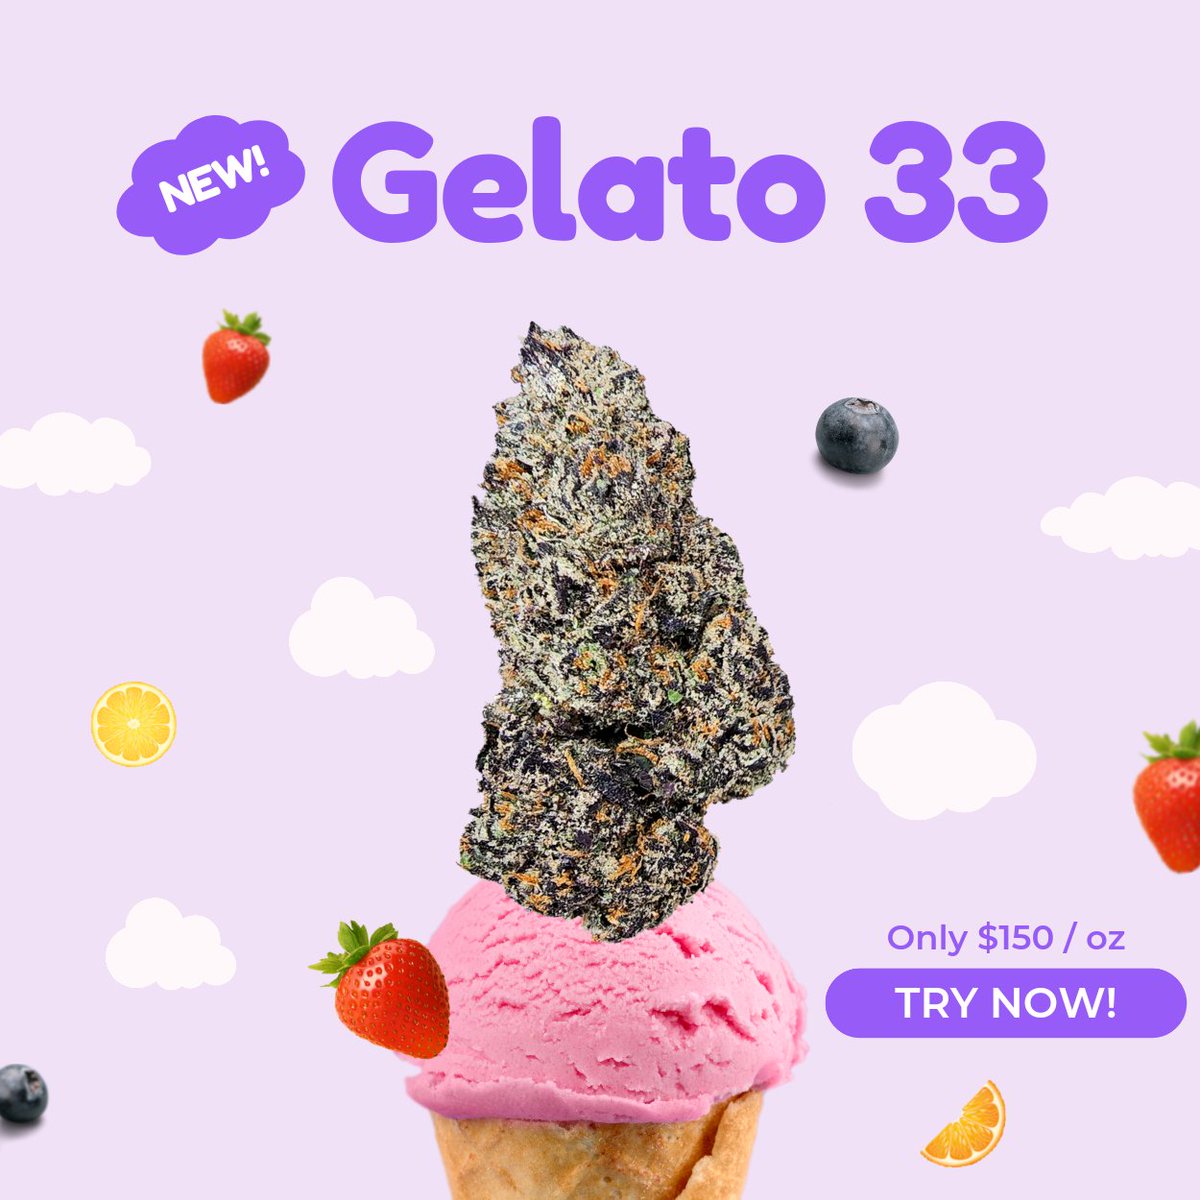 Our frosty Gelato 33 is perfect for staying stoned in this hot spring weather! mastertokes.com/product/gelato…
#cannabiscommunity #bcbud #hightimes